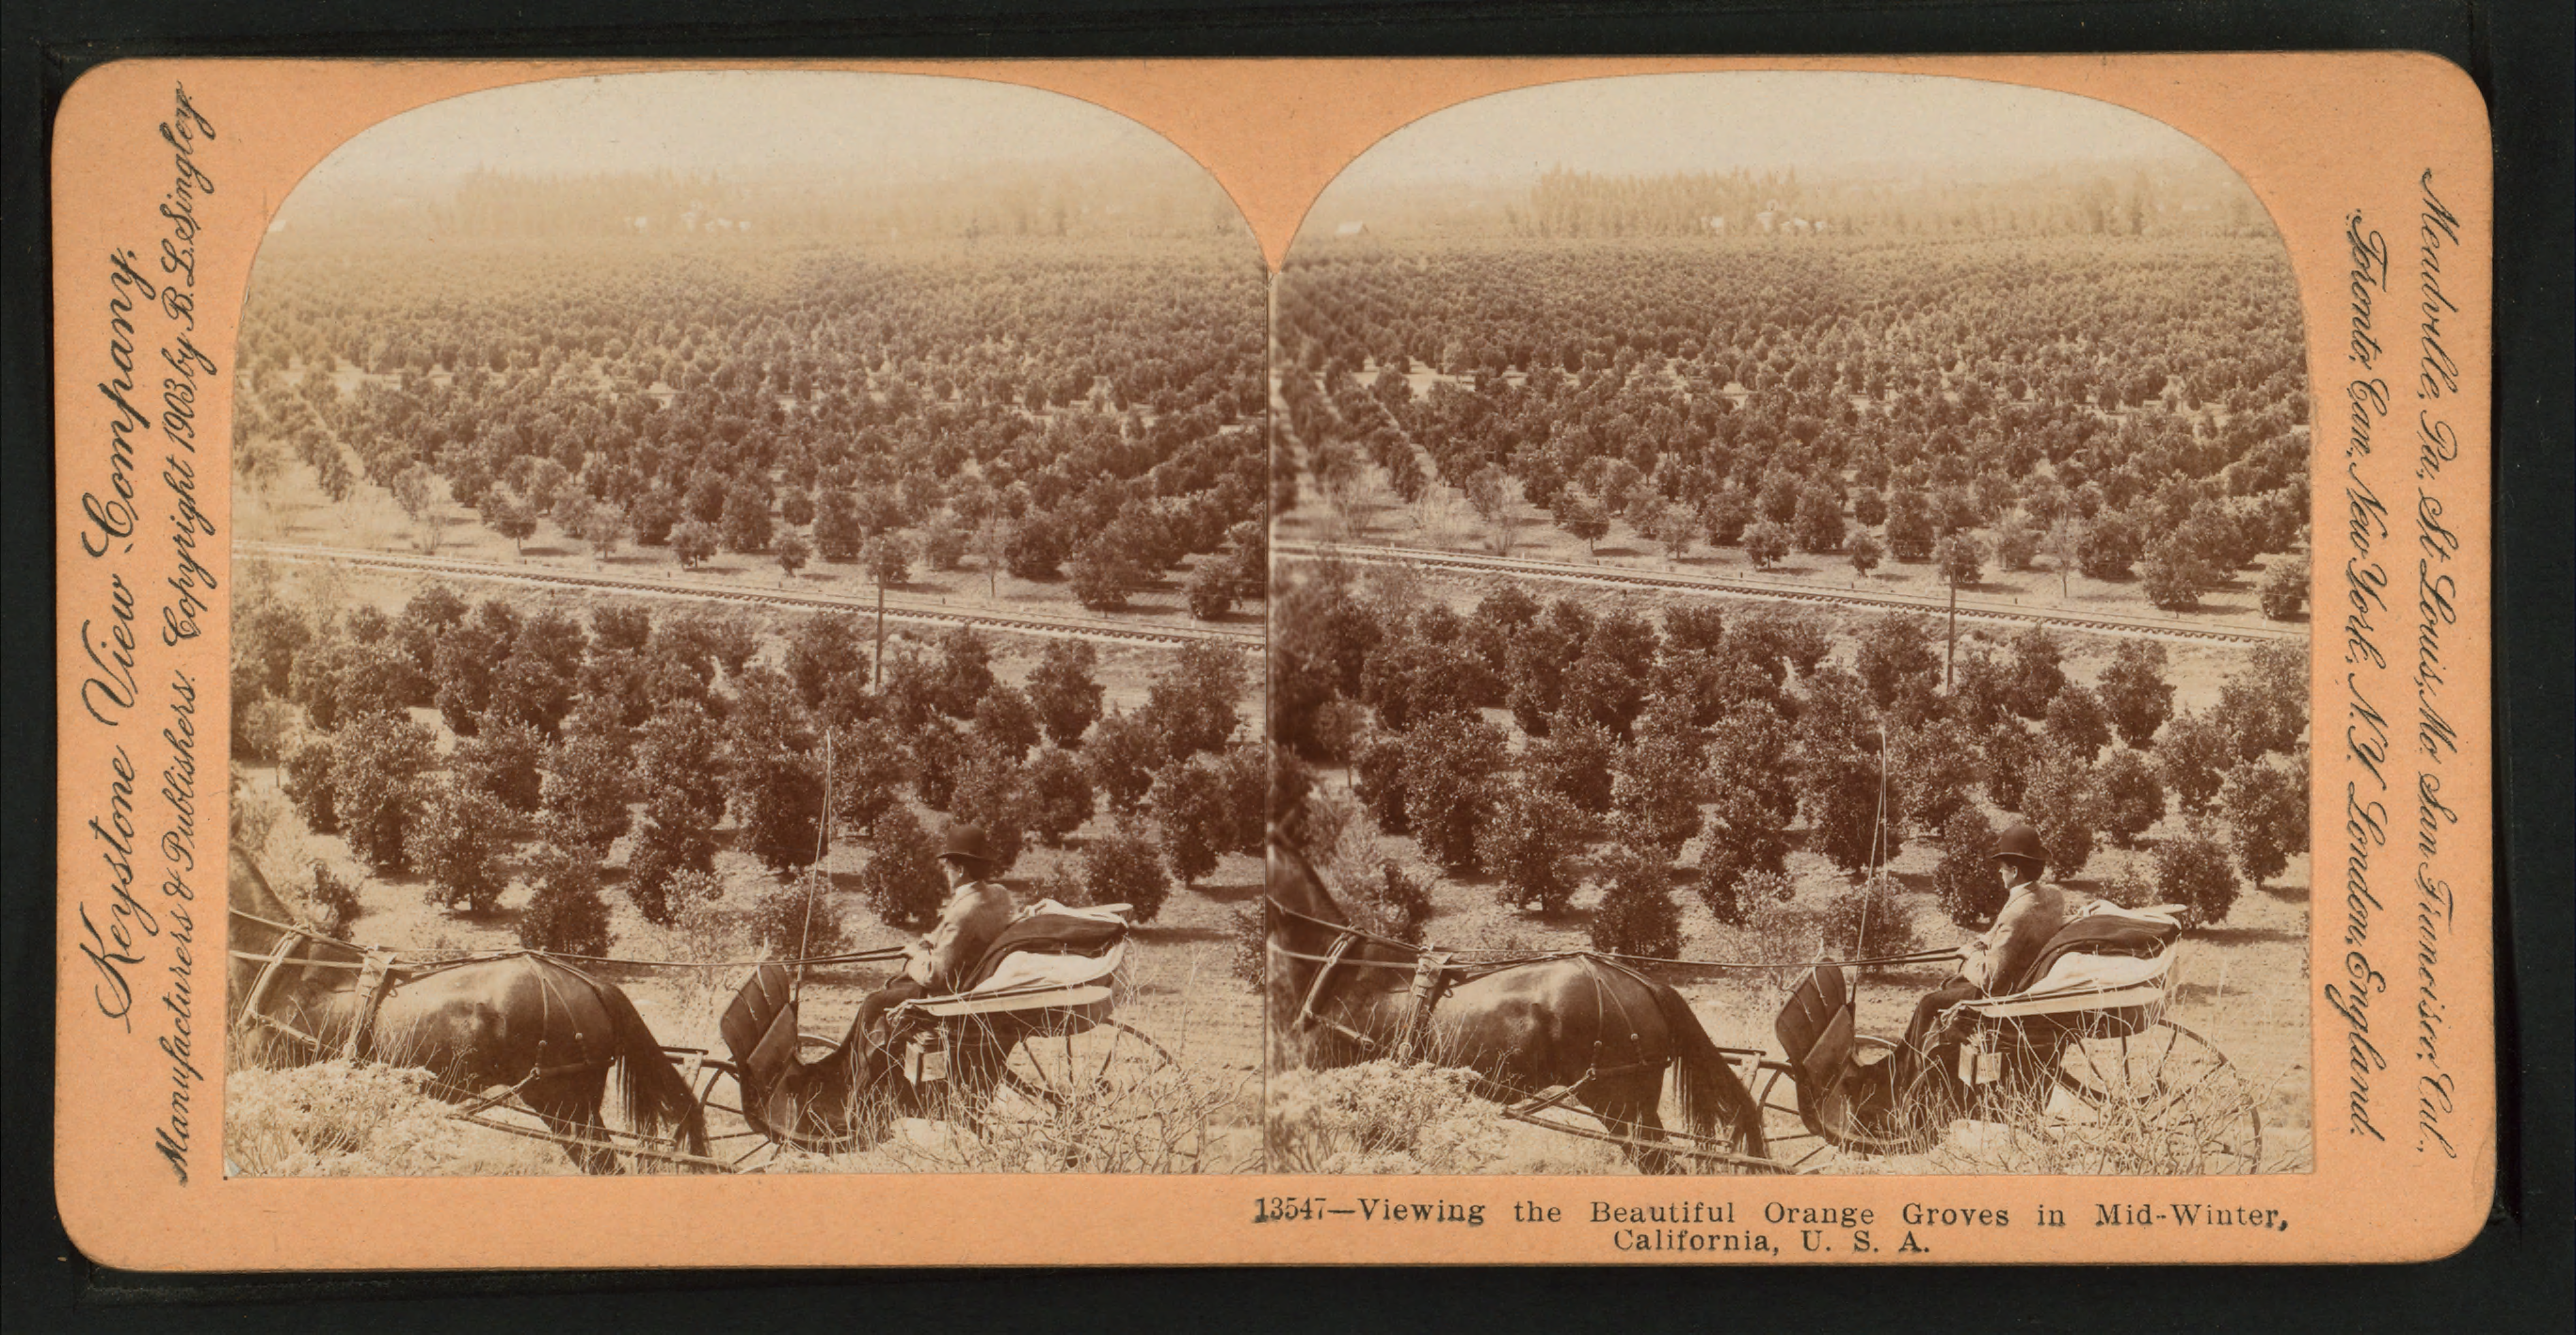 Viewing the beautiful orange groves in mid-winter in California, from Robert N. Dennis collection of stereoscopic views